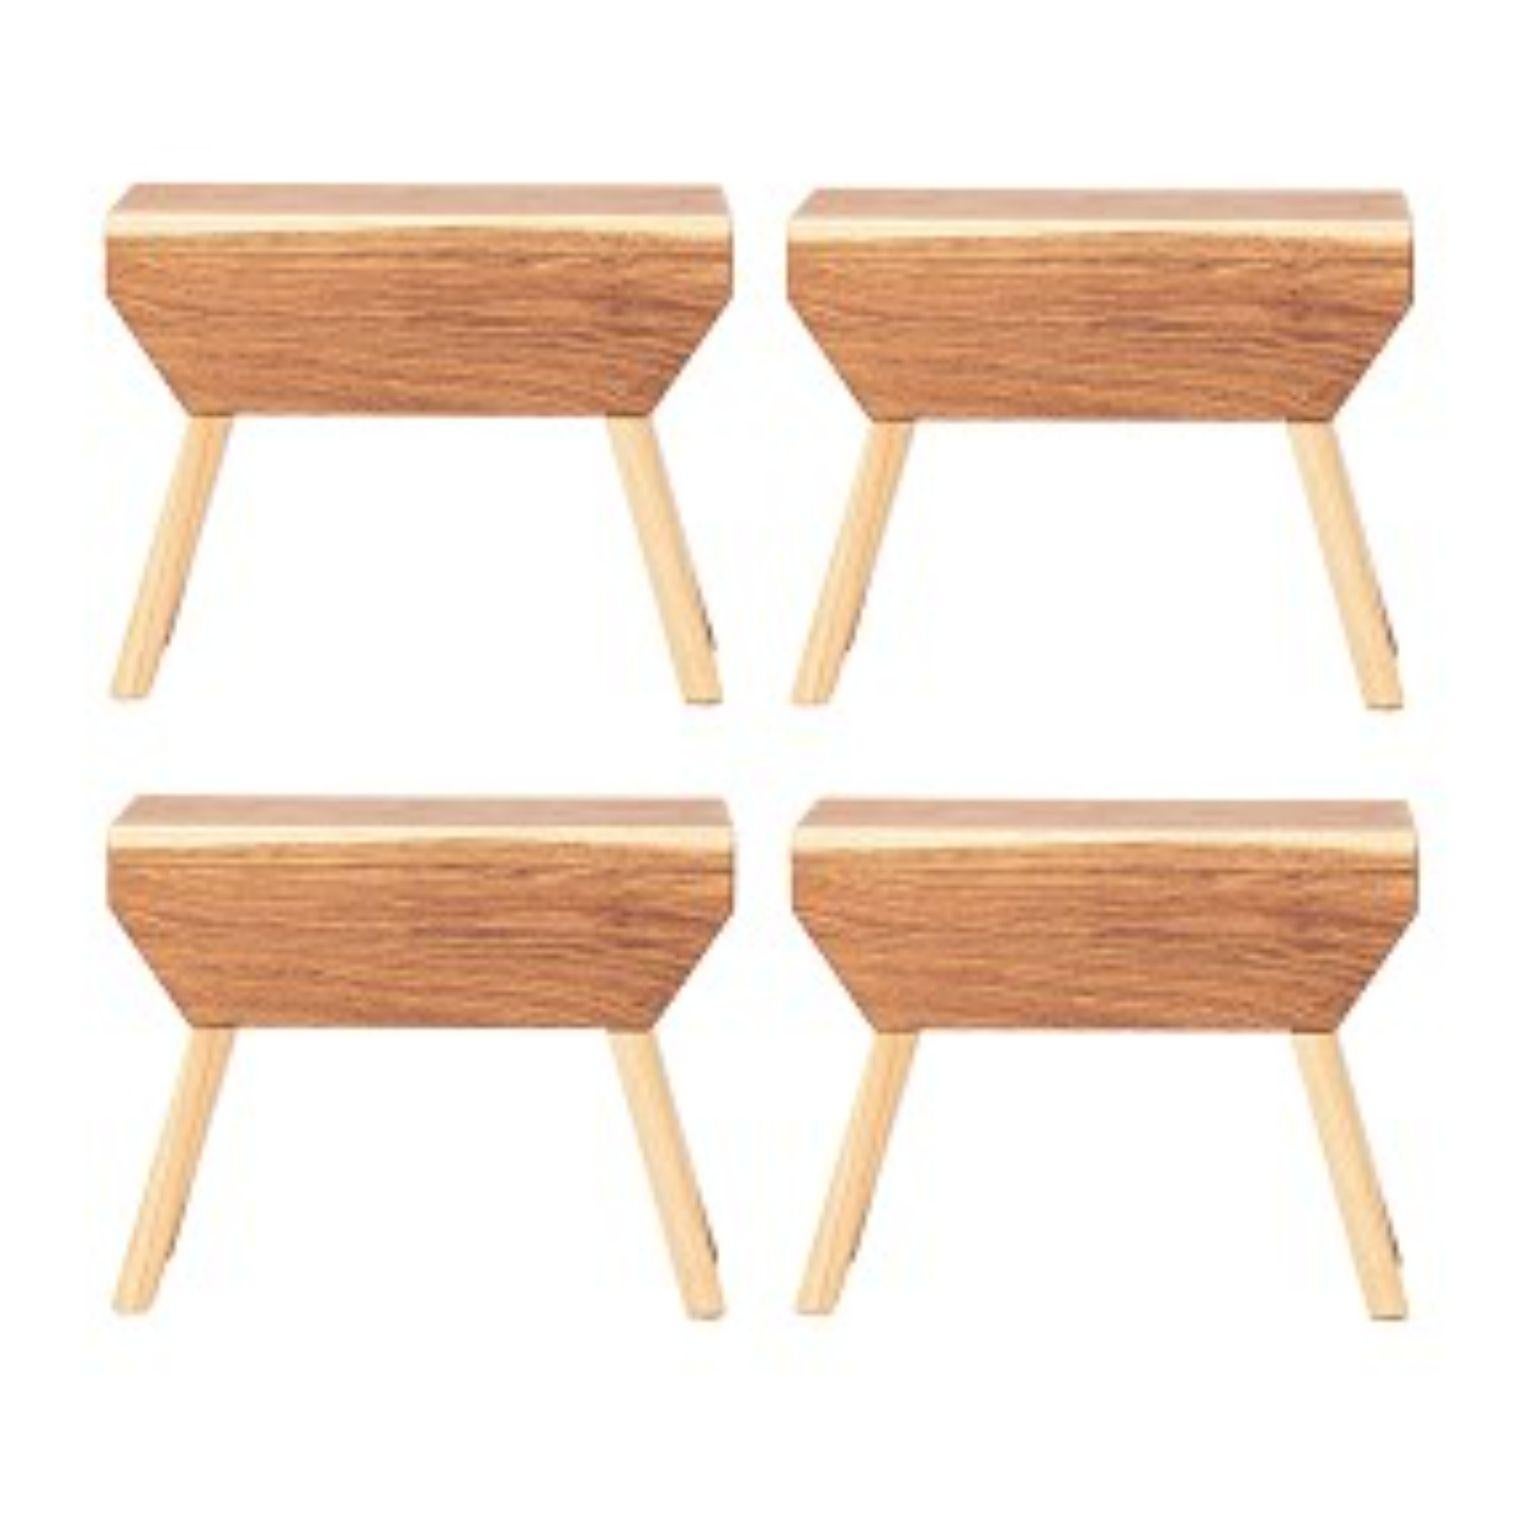 Set of 4 Oslinchik 01 low stools by Oito
Dimensions: D 21 x W 38 x H 30 cm
Materials: Oak wood, wax or paint.
Weight: 4 kg
Also available in different colours.

Wooden stools are a trend for environmental friendliness and home comfort. We try